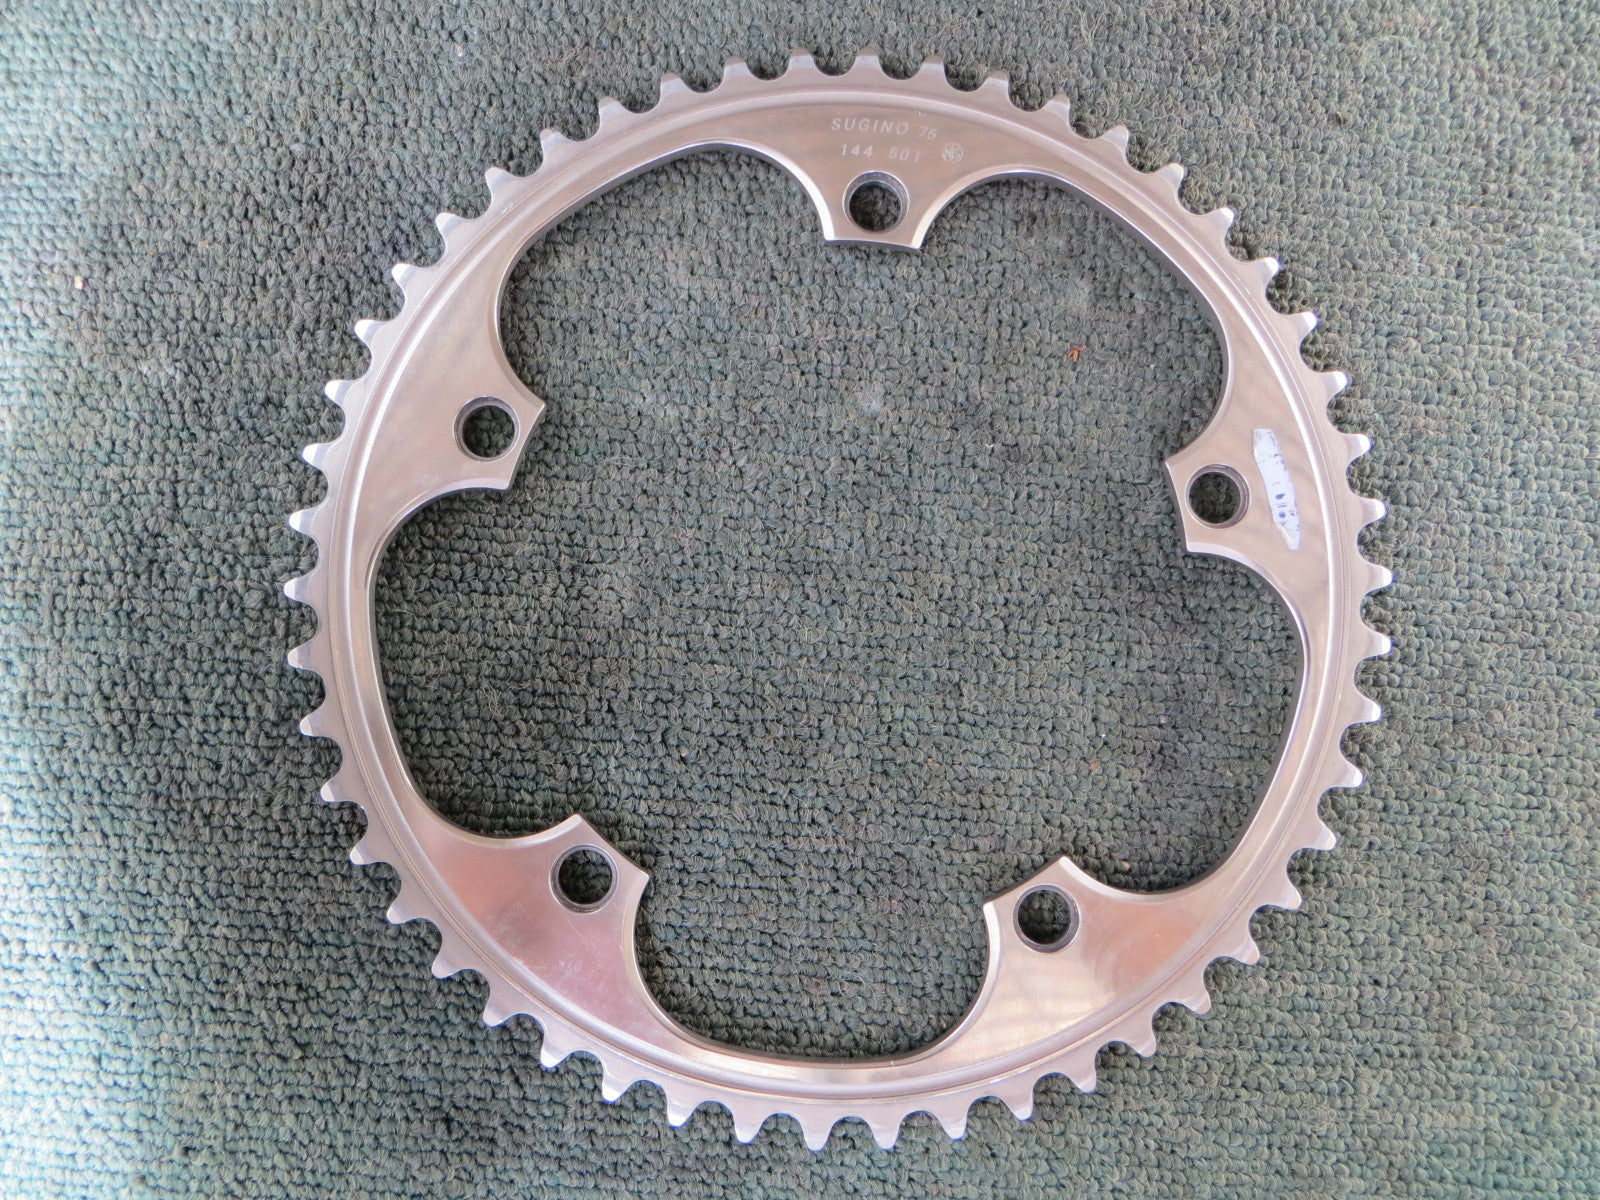 Sugino S-cubic 1/8" 144BCD NJS Chainring 50T Mirror Finish (17071929)